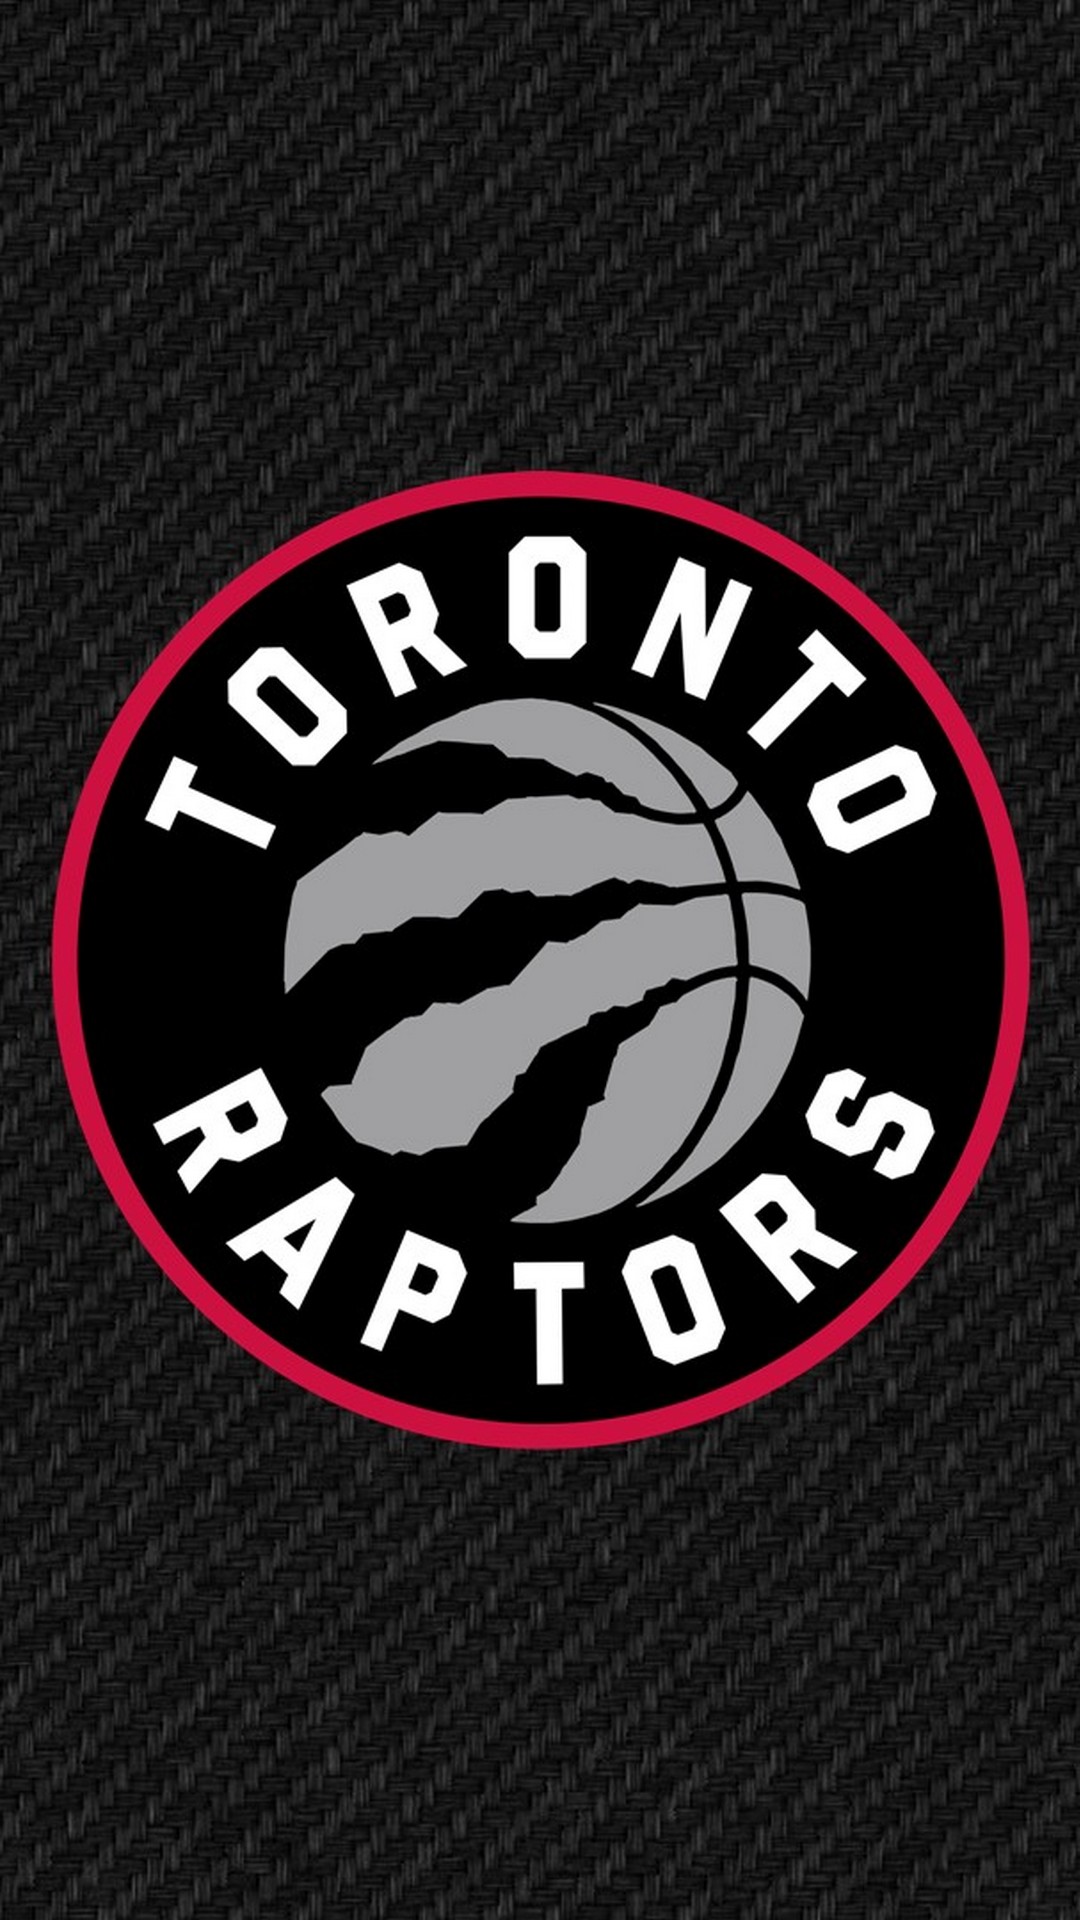 Toronto Raptors Backgrounds For Android with image resolution 1080x1920 pixel. You can make this wallpaper for your Android backgrounds, Tablet, Smartphones Screensavers and Mobile Phone Lock Screen